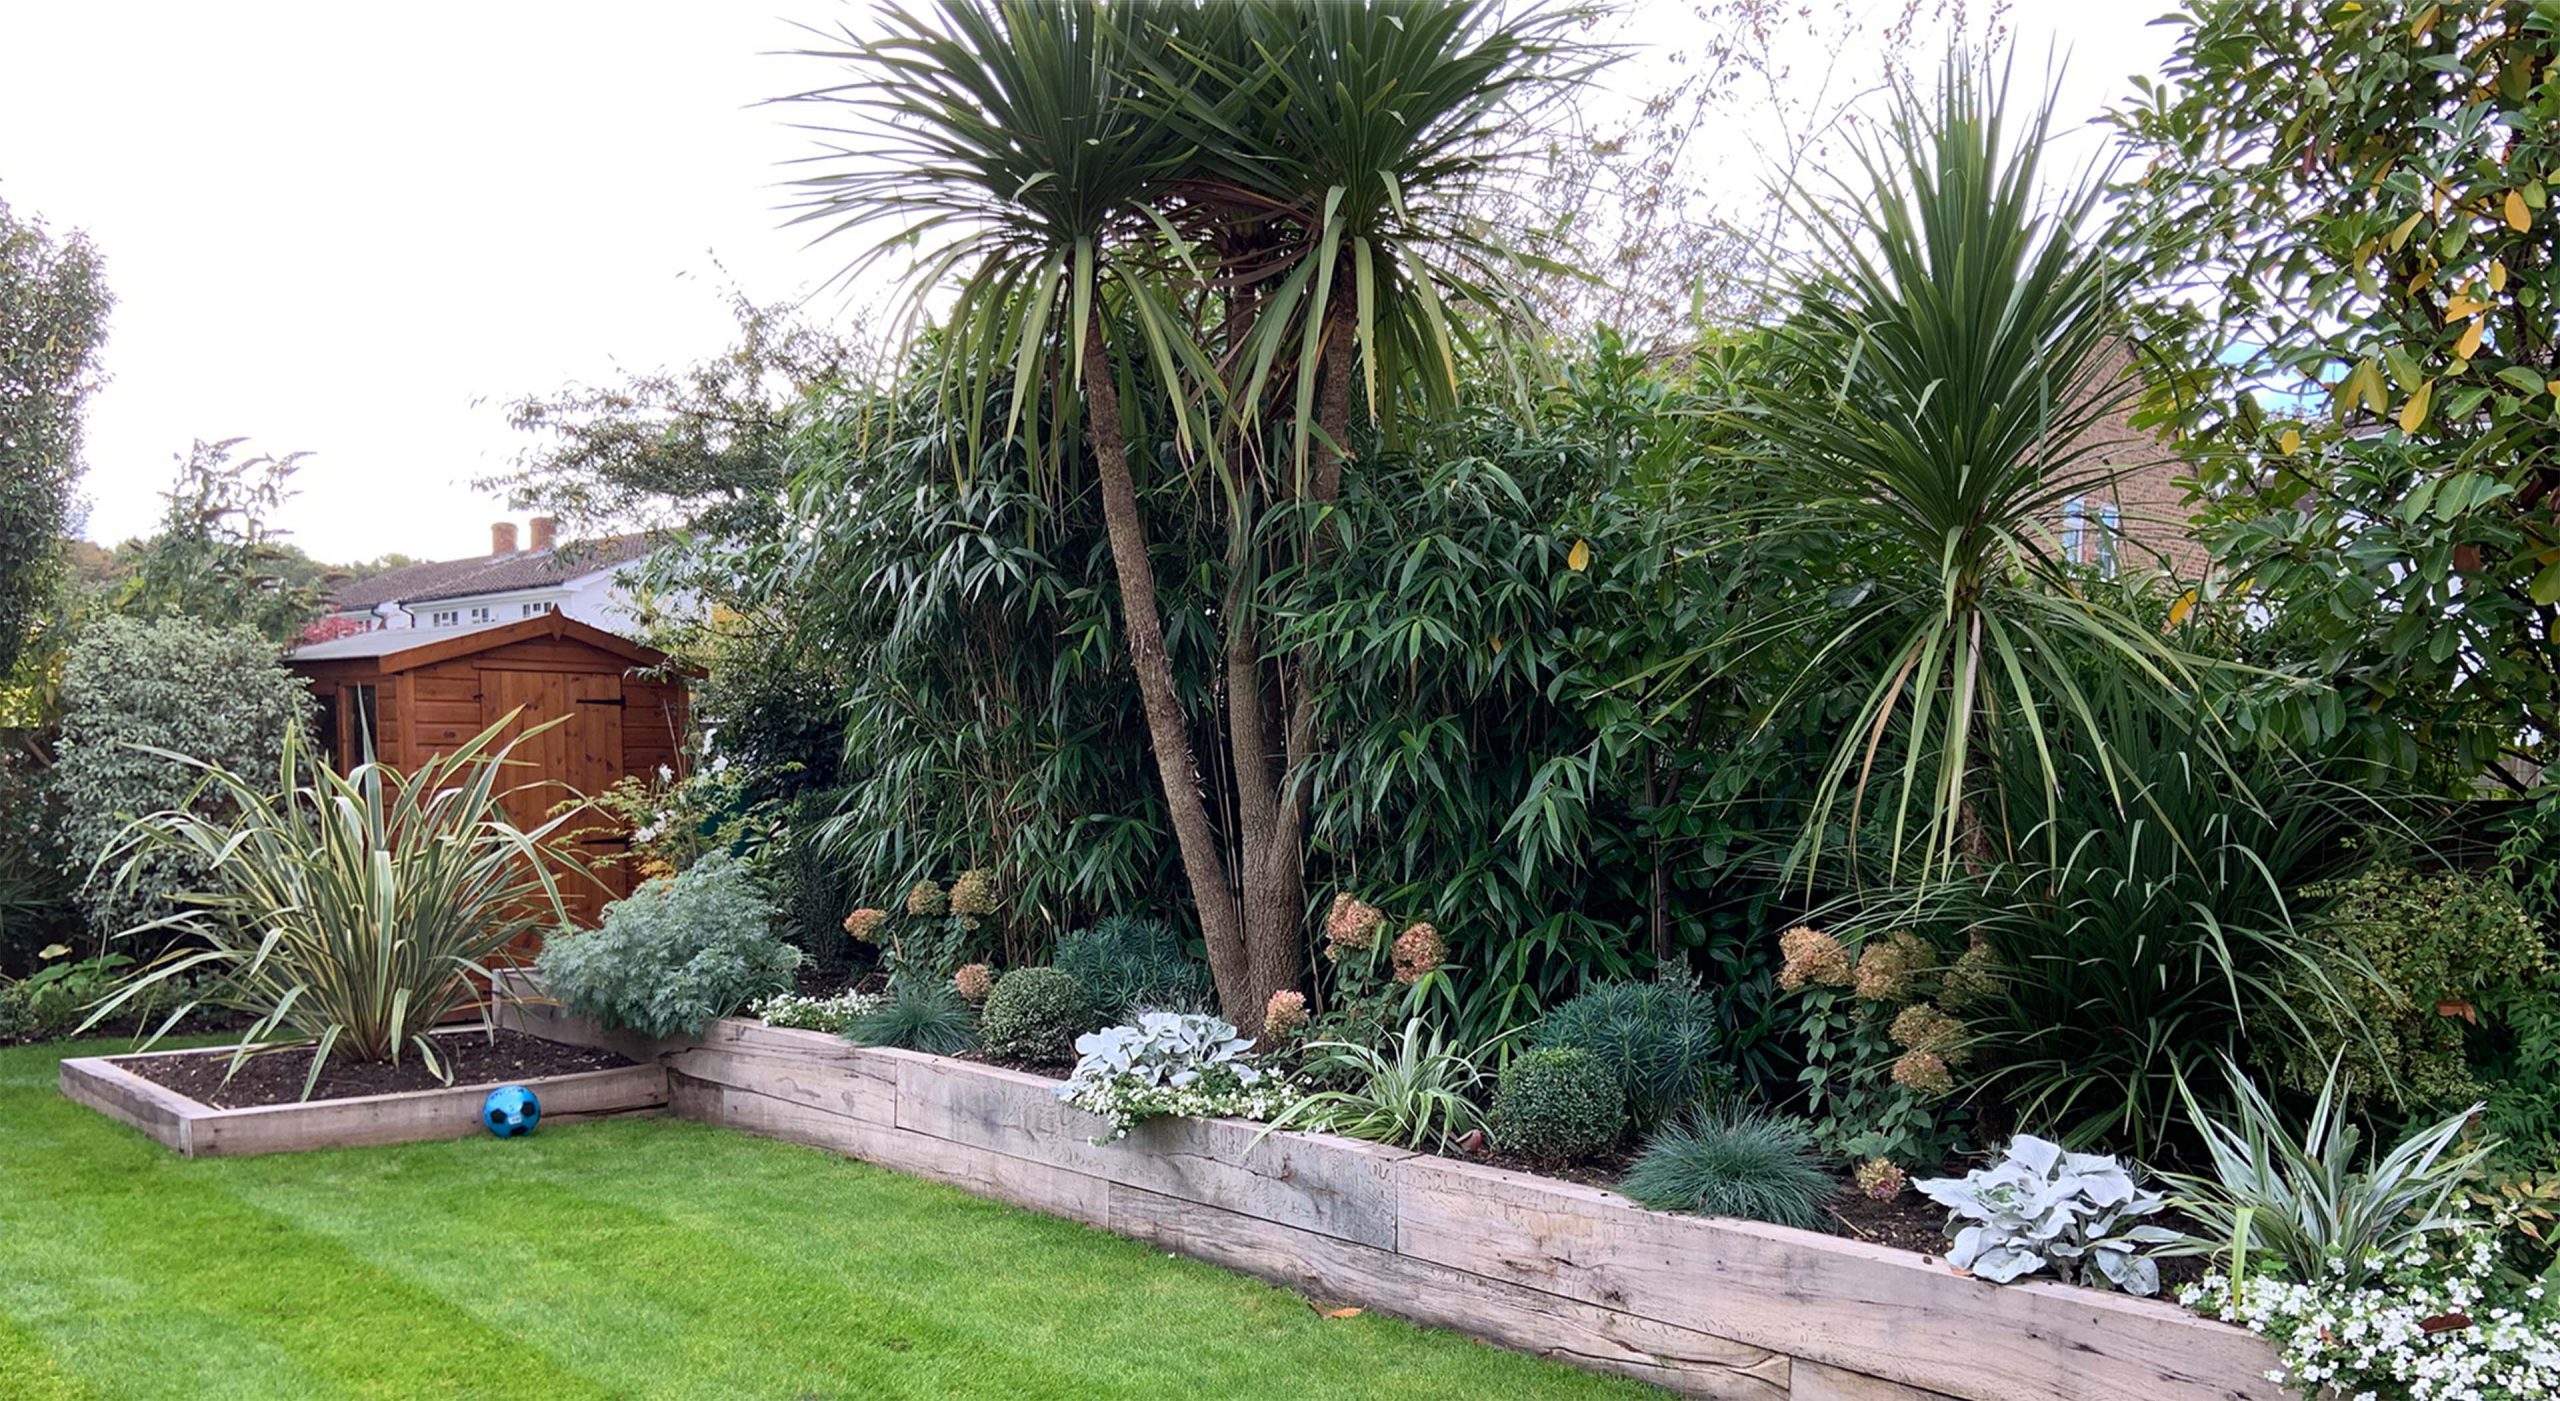 Foliage/ tropical inspired garden with raised beds using a rustic reclaimed sleepers designed by Willow Alexander